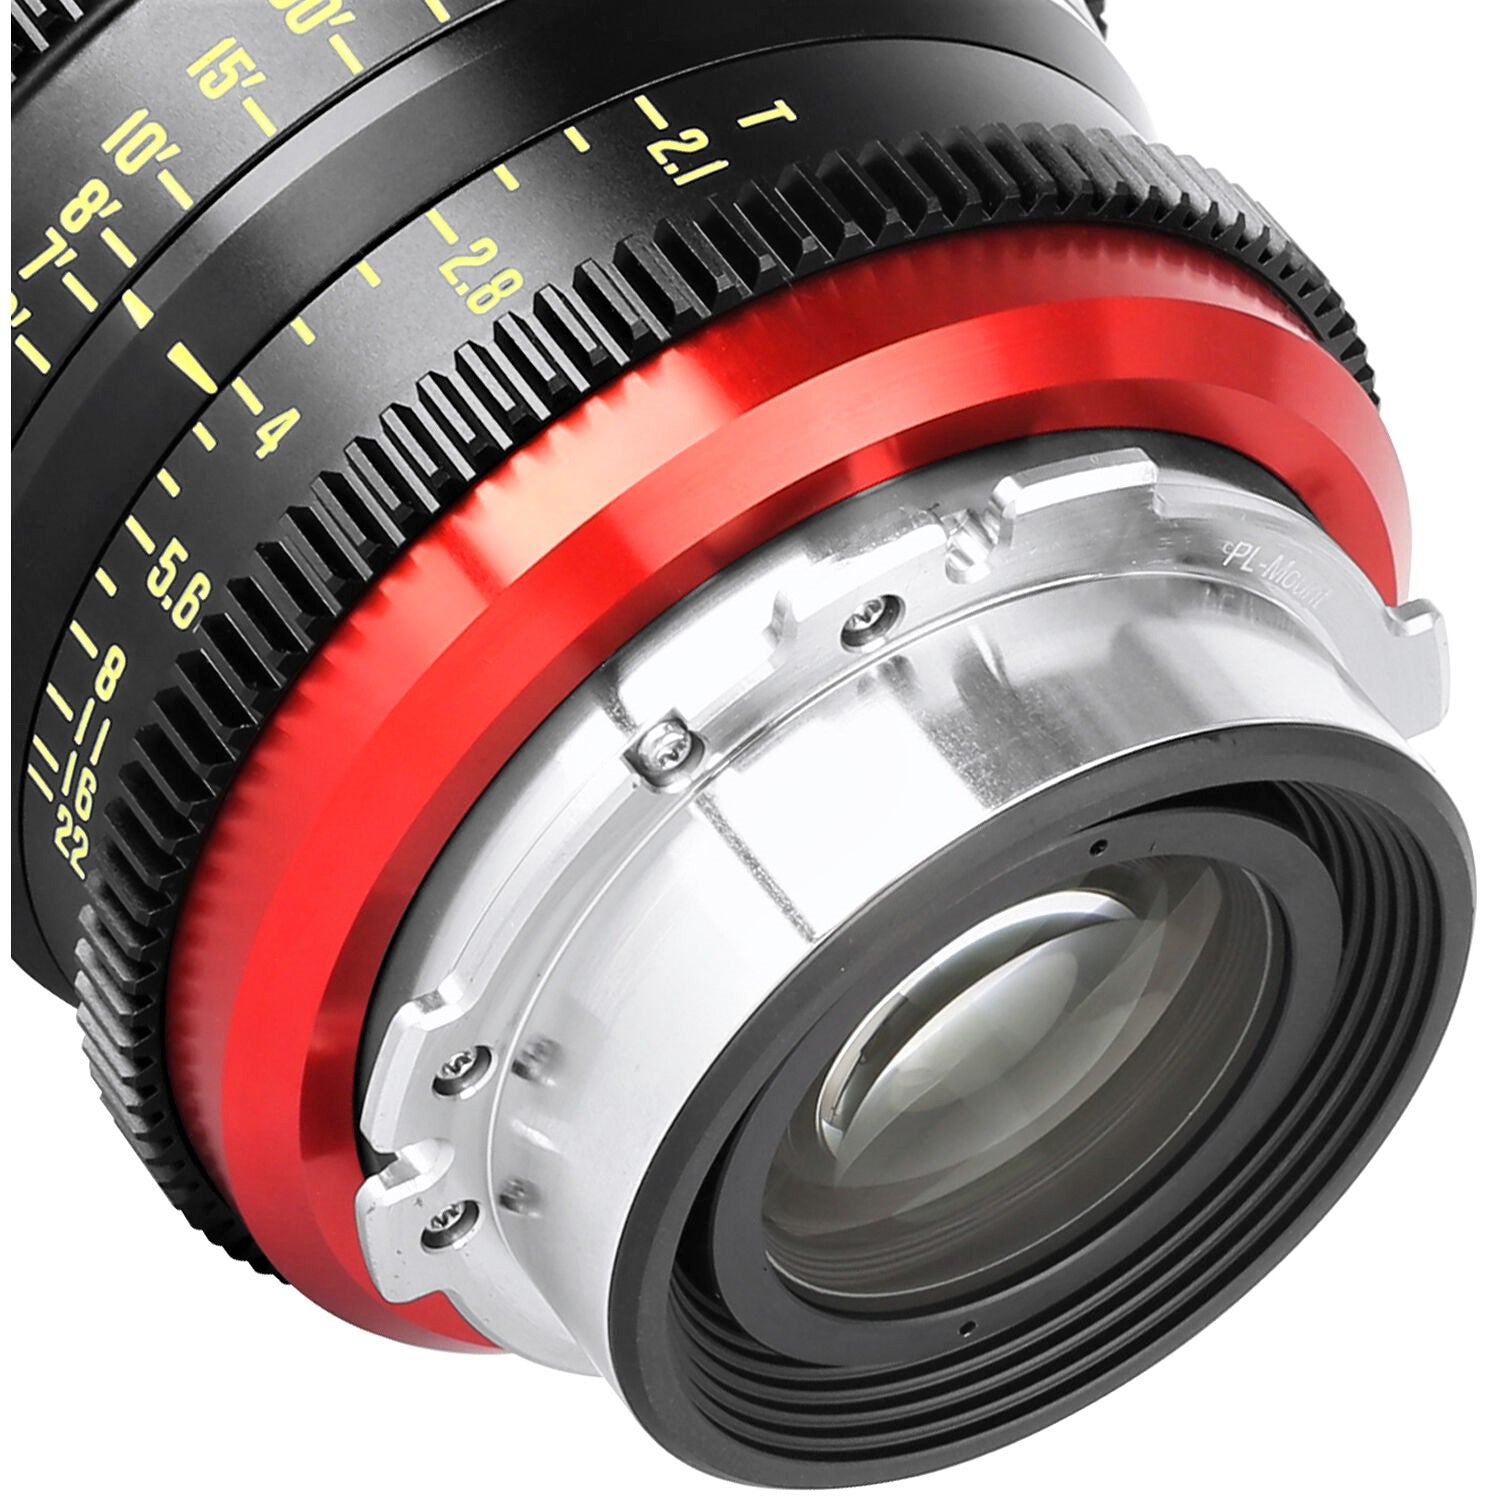 Meike Cinema Full Frame 35mm T2.1 Lens (PL Mount in a Close-Up View)